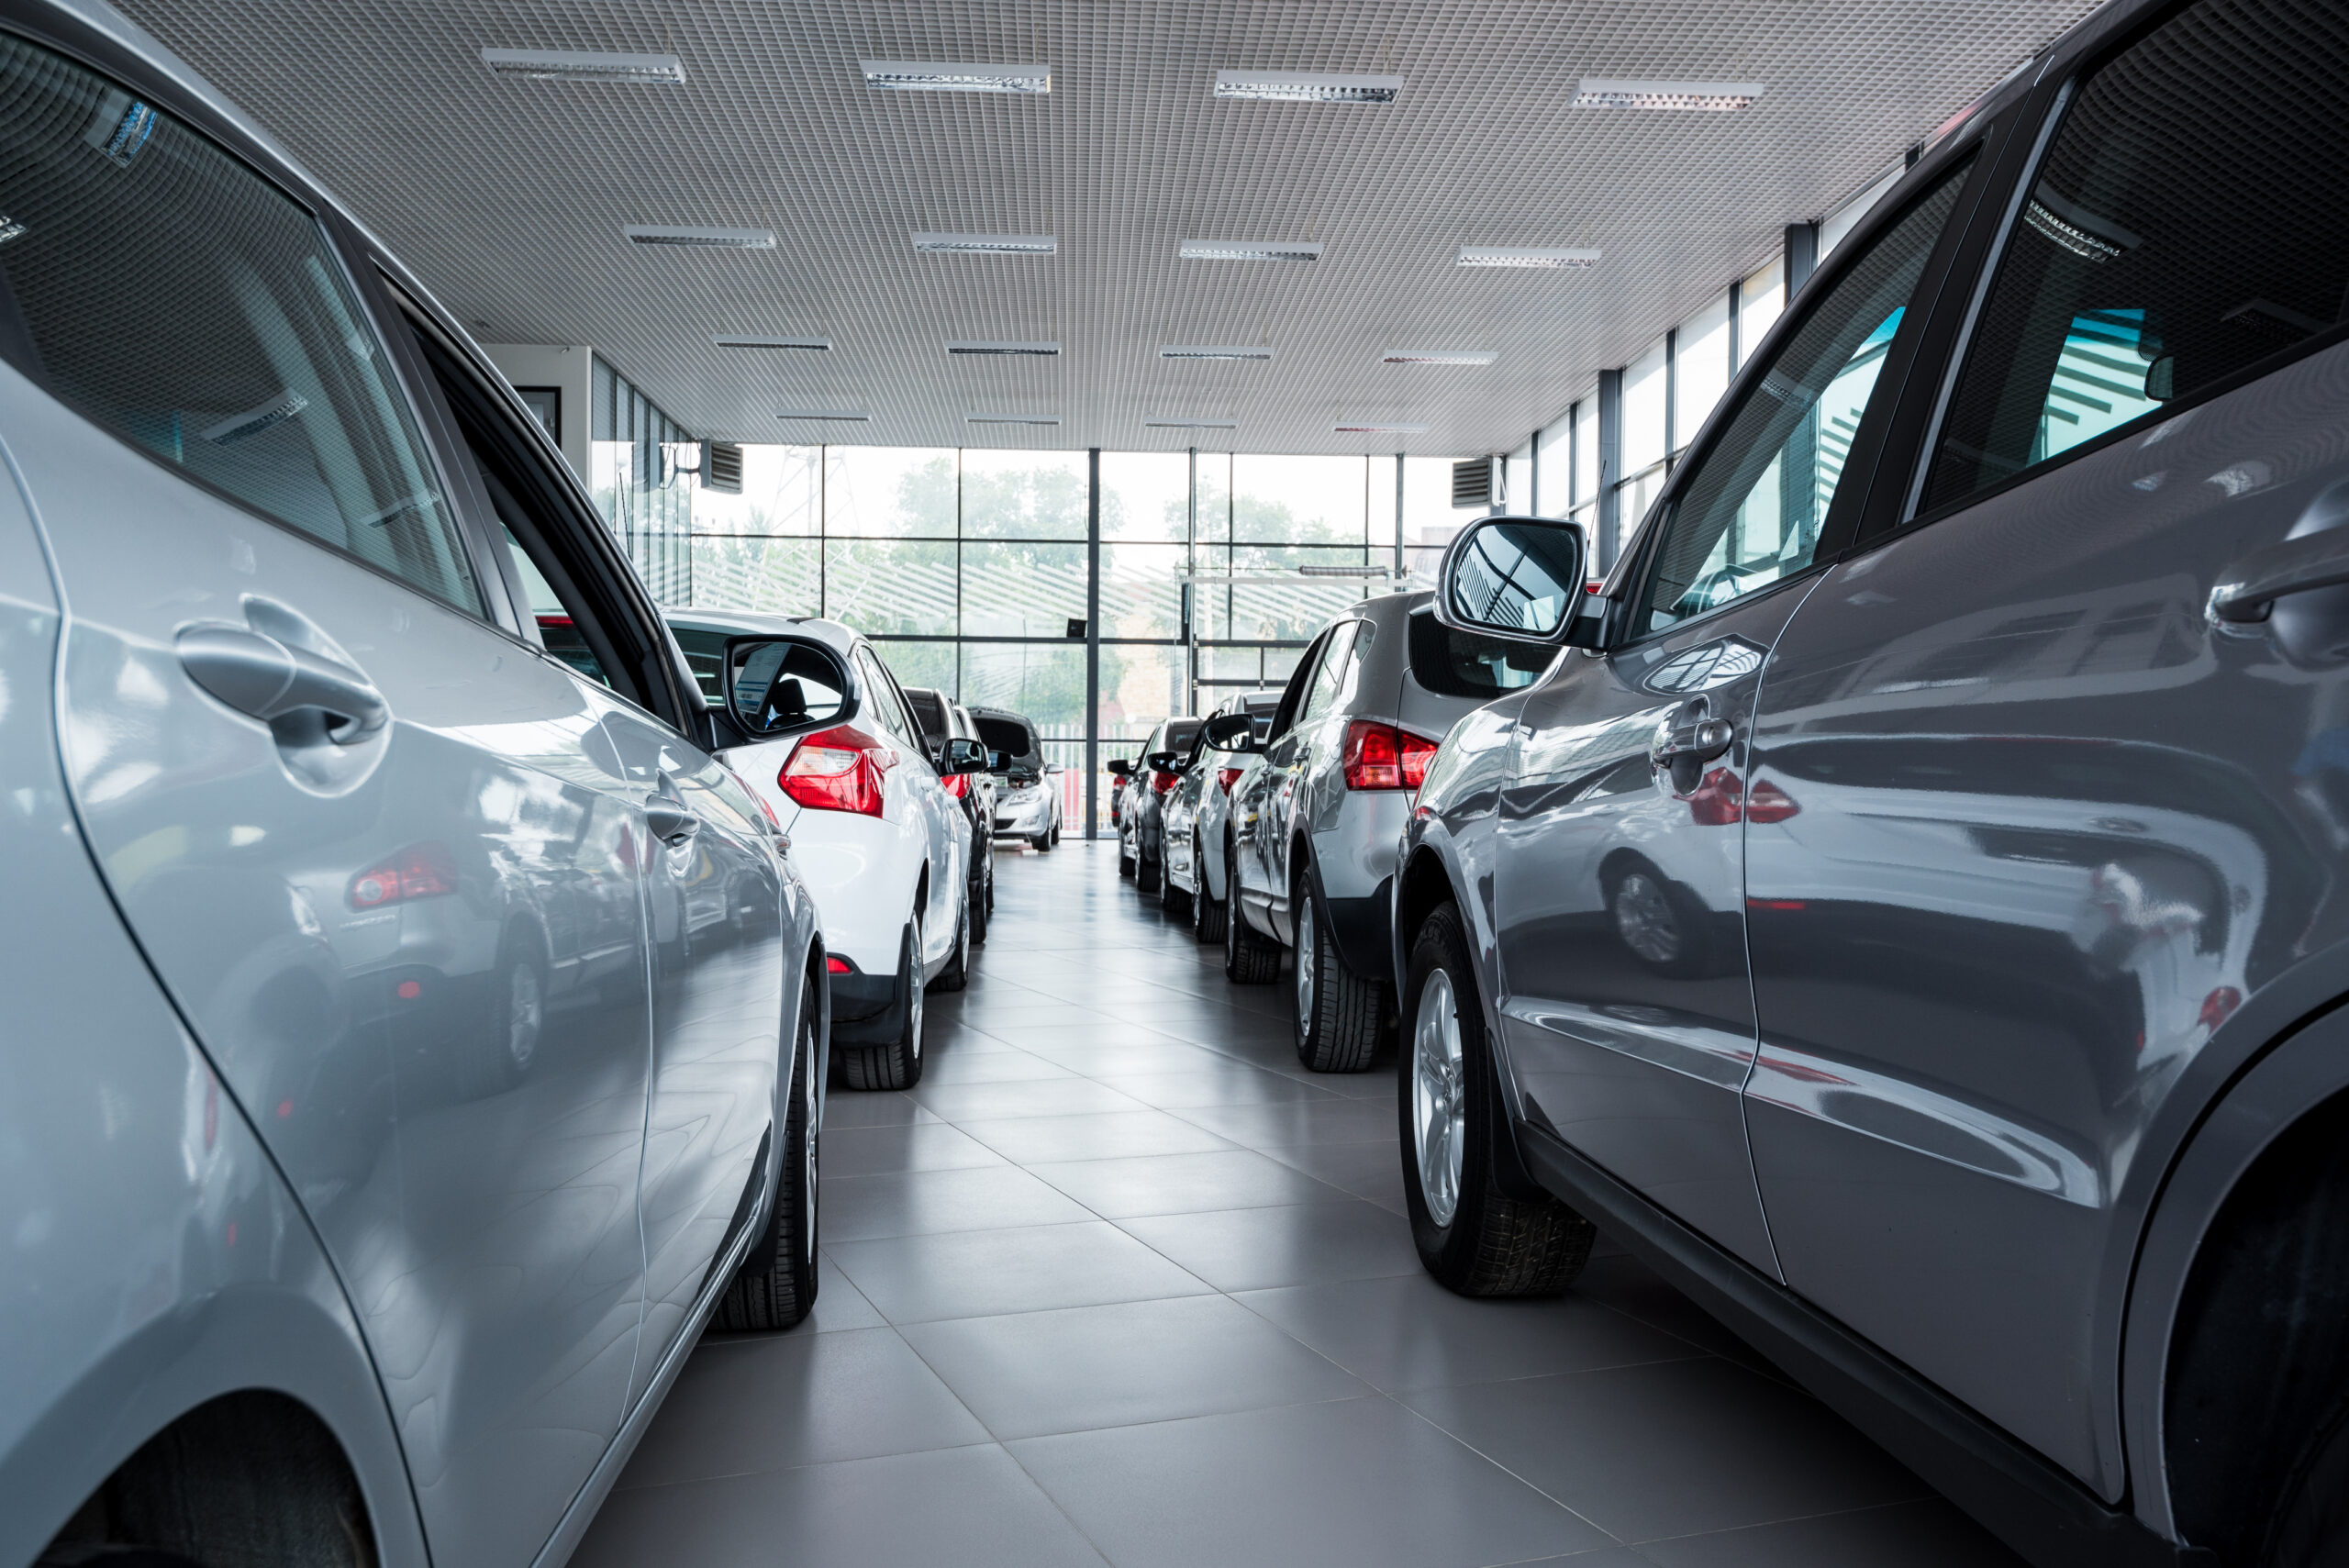 Stock of cars in showroom of automobile dealer